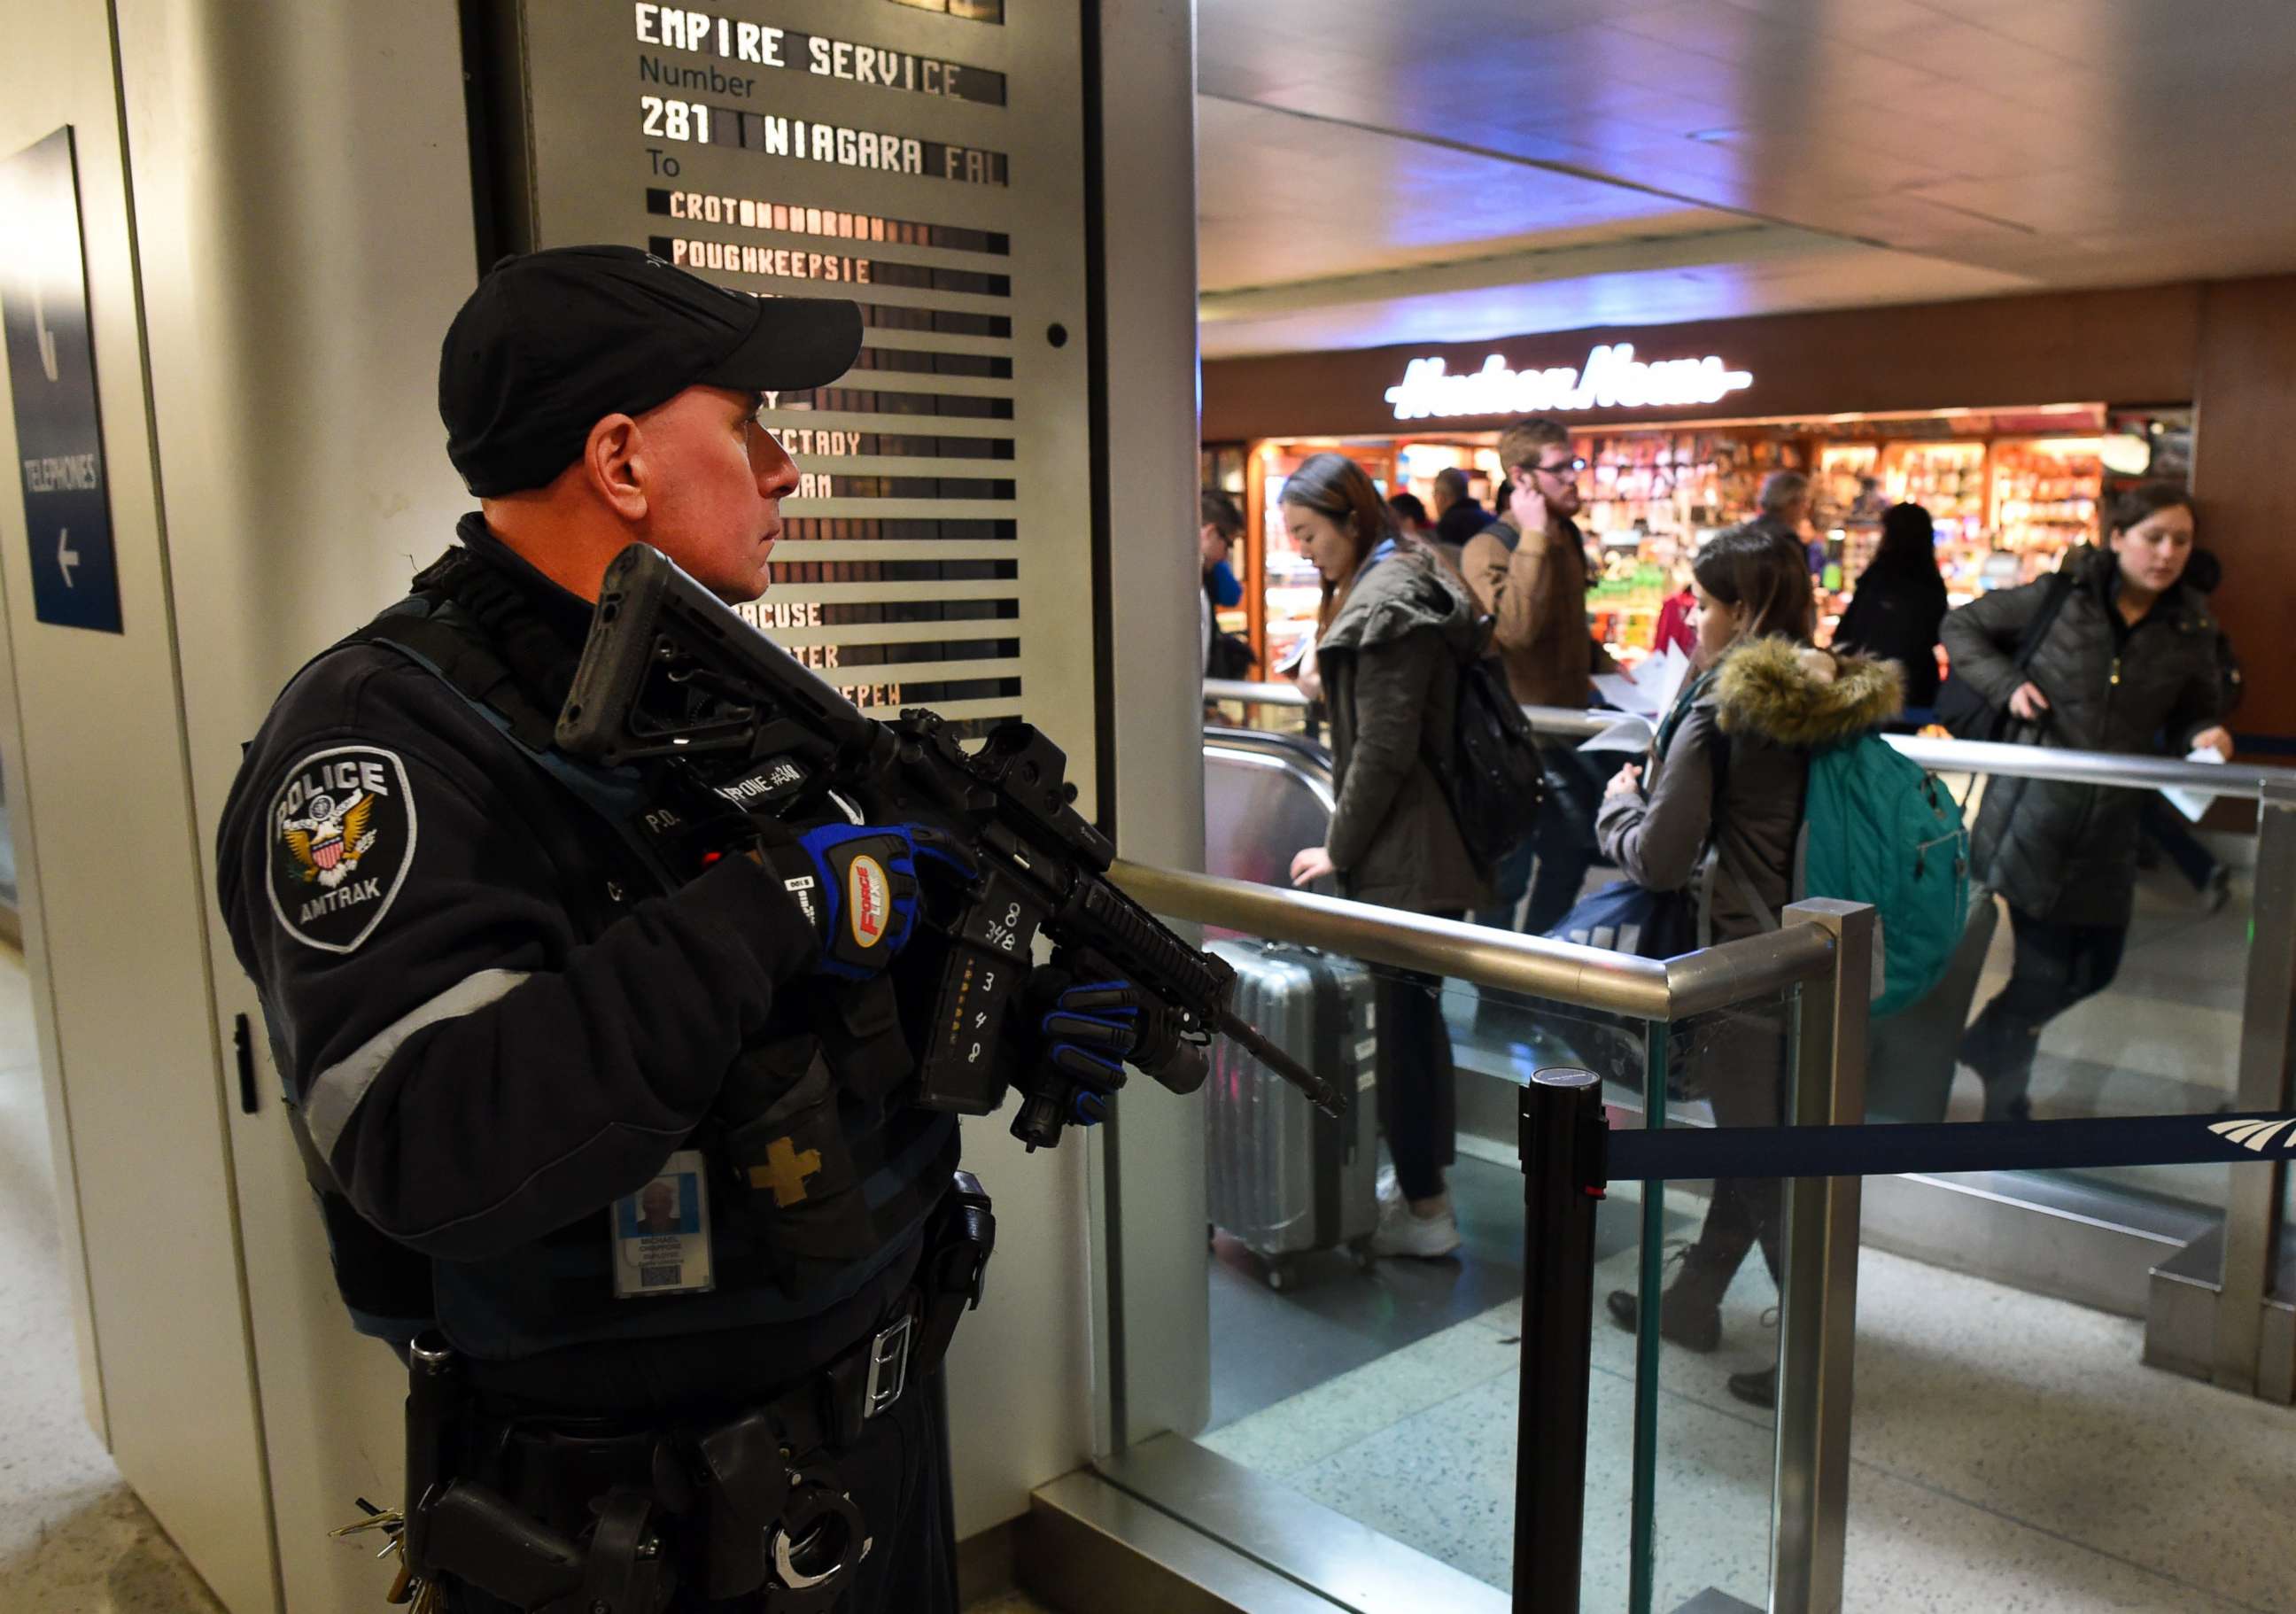 PHOTO: An Amtrak Police officer watches passengersas they board a train at Penn Station on Nov. 24, 2015 in New York.